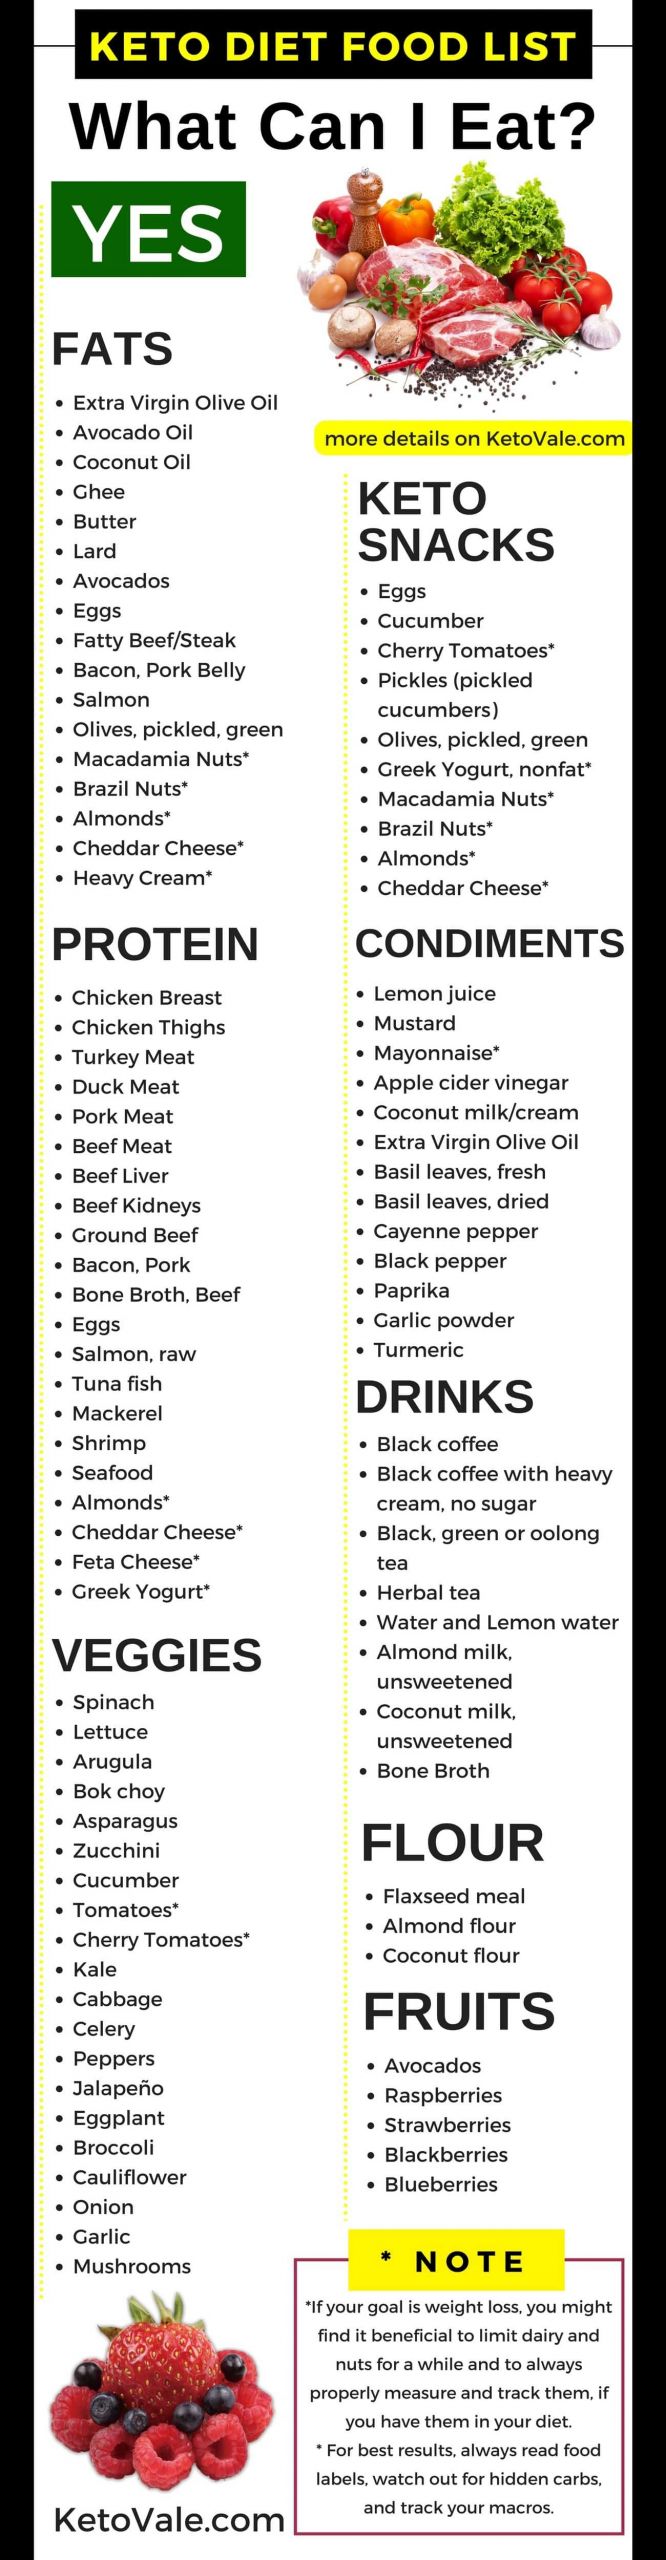 Foods You Can Eat On Keto Diet
 Keto Diet Food List Low Carb Grocery Shopping Guide PDF